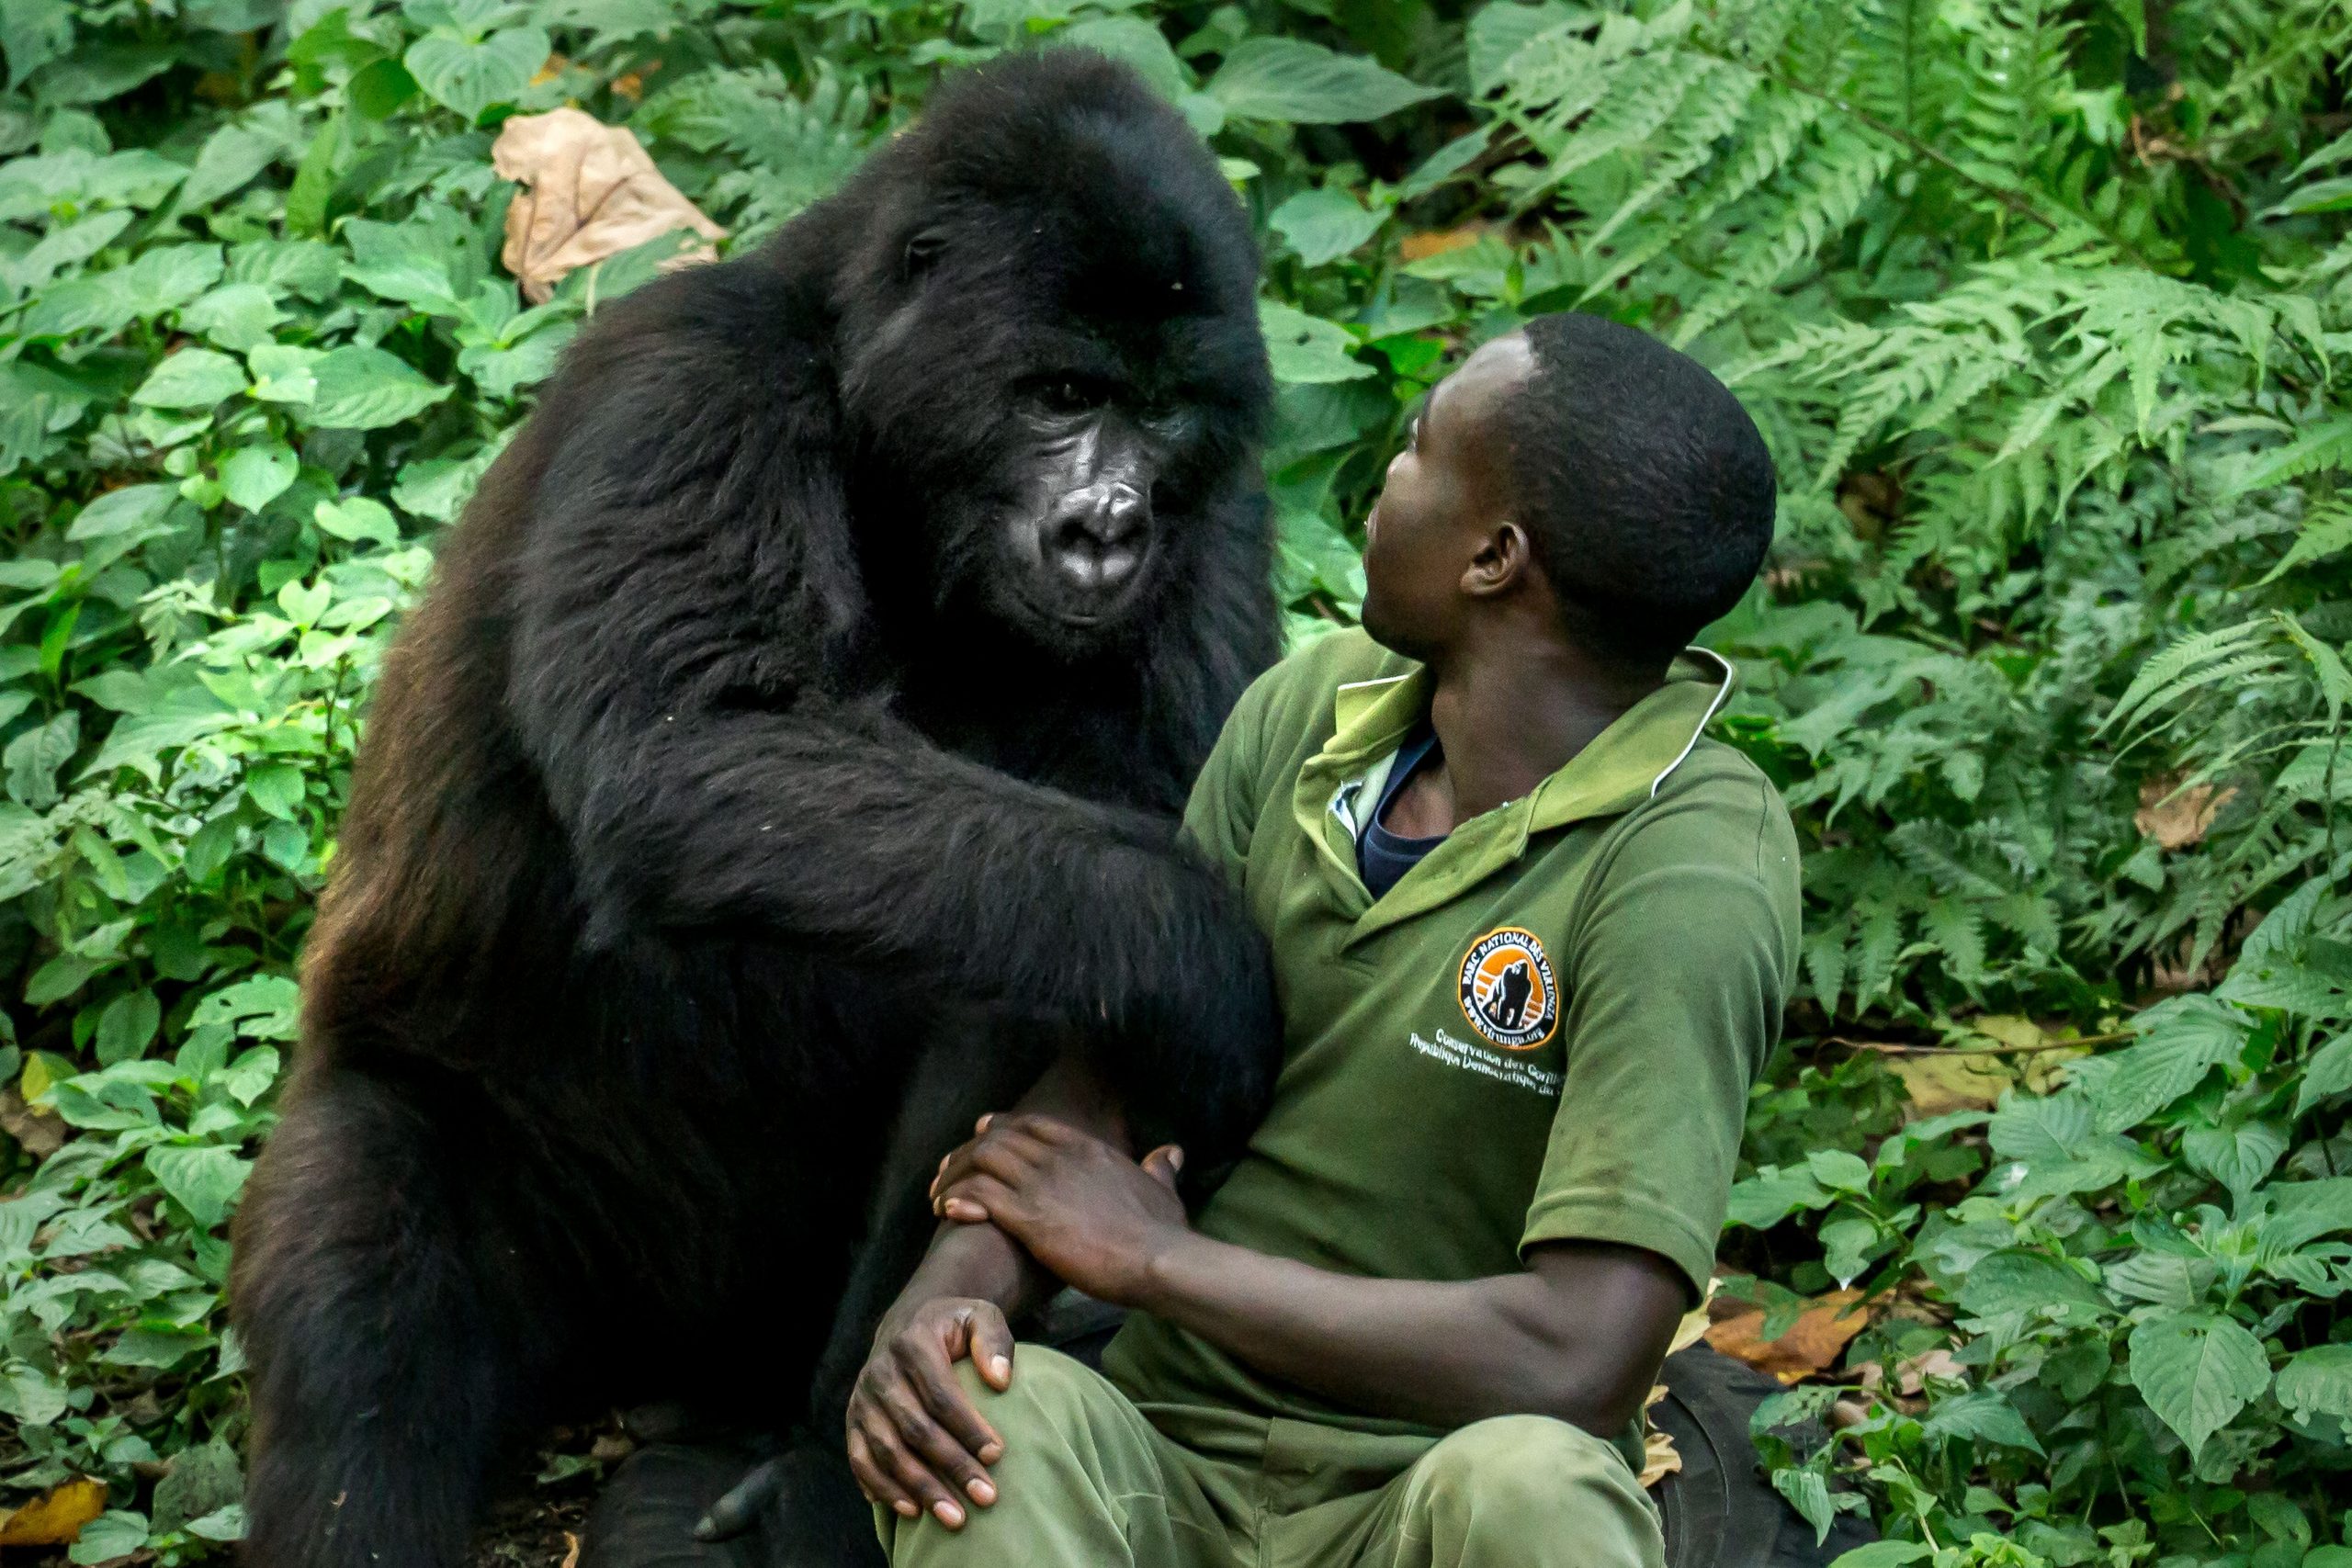 Main Difference Between a Gorilla & Human Being